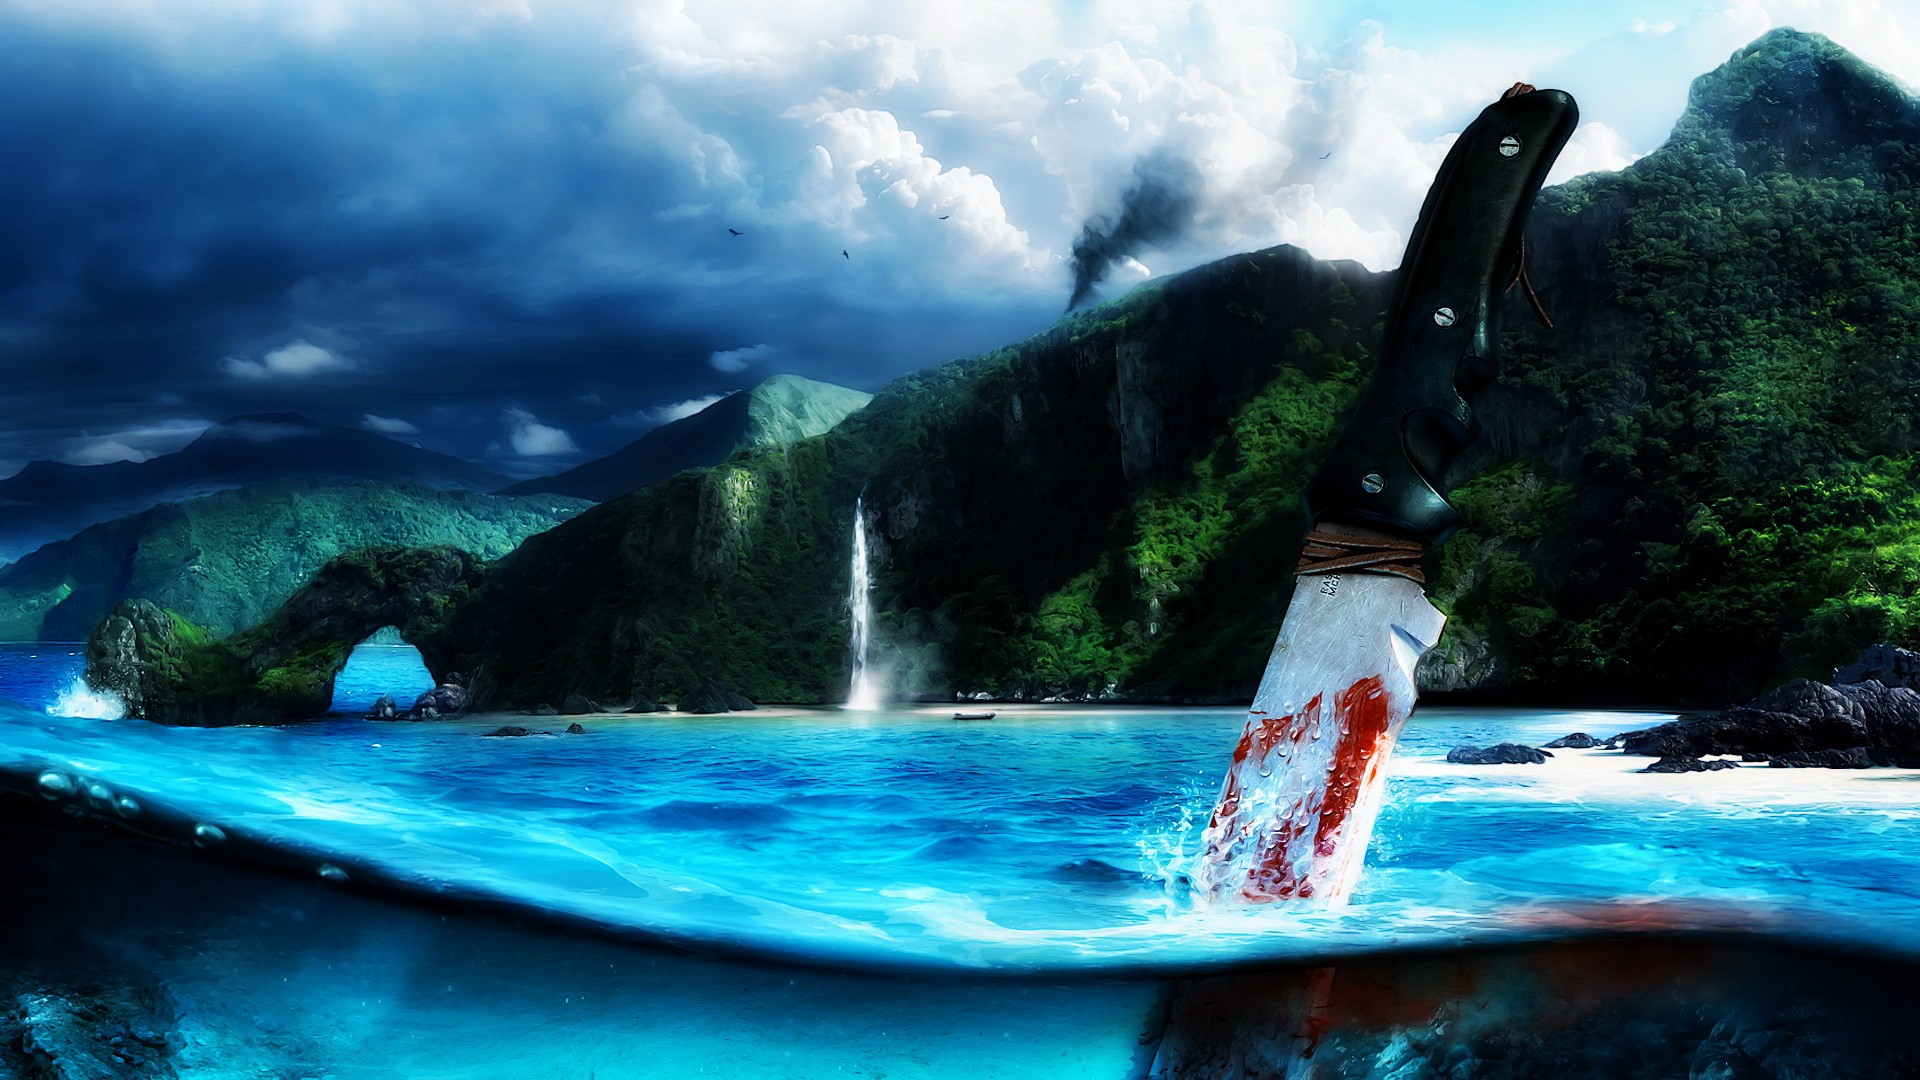 Free photo Atmospheric picture from the game far cry 3 with a bloody knife